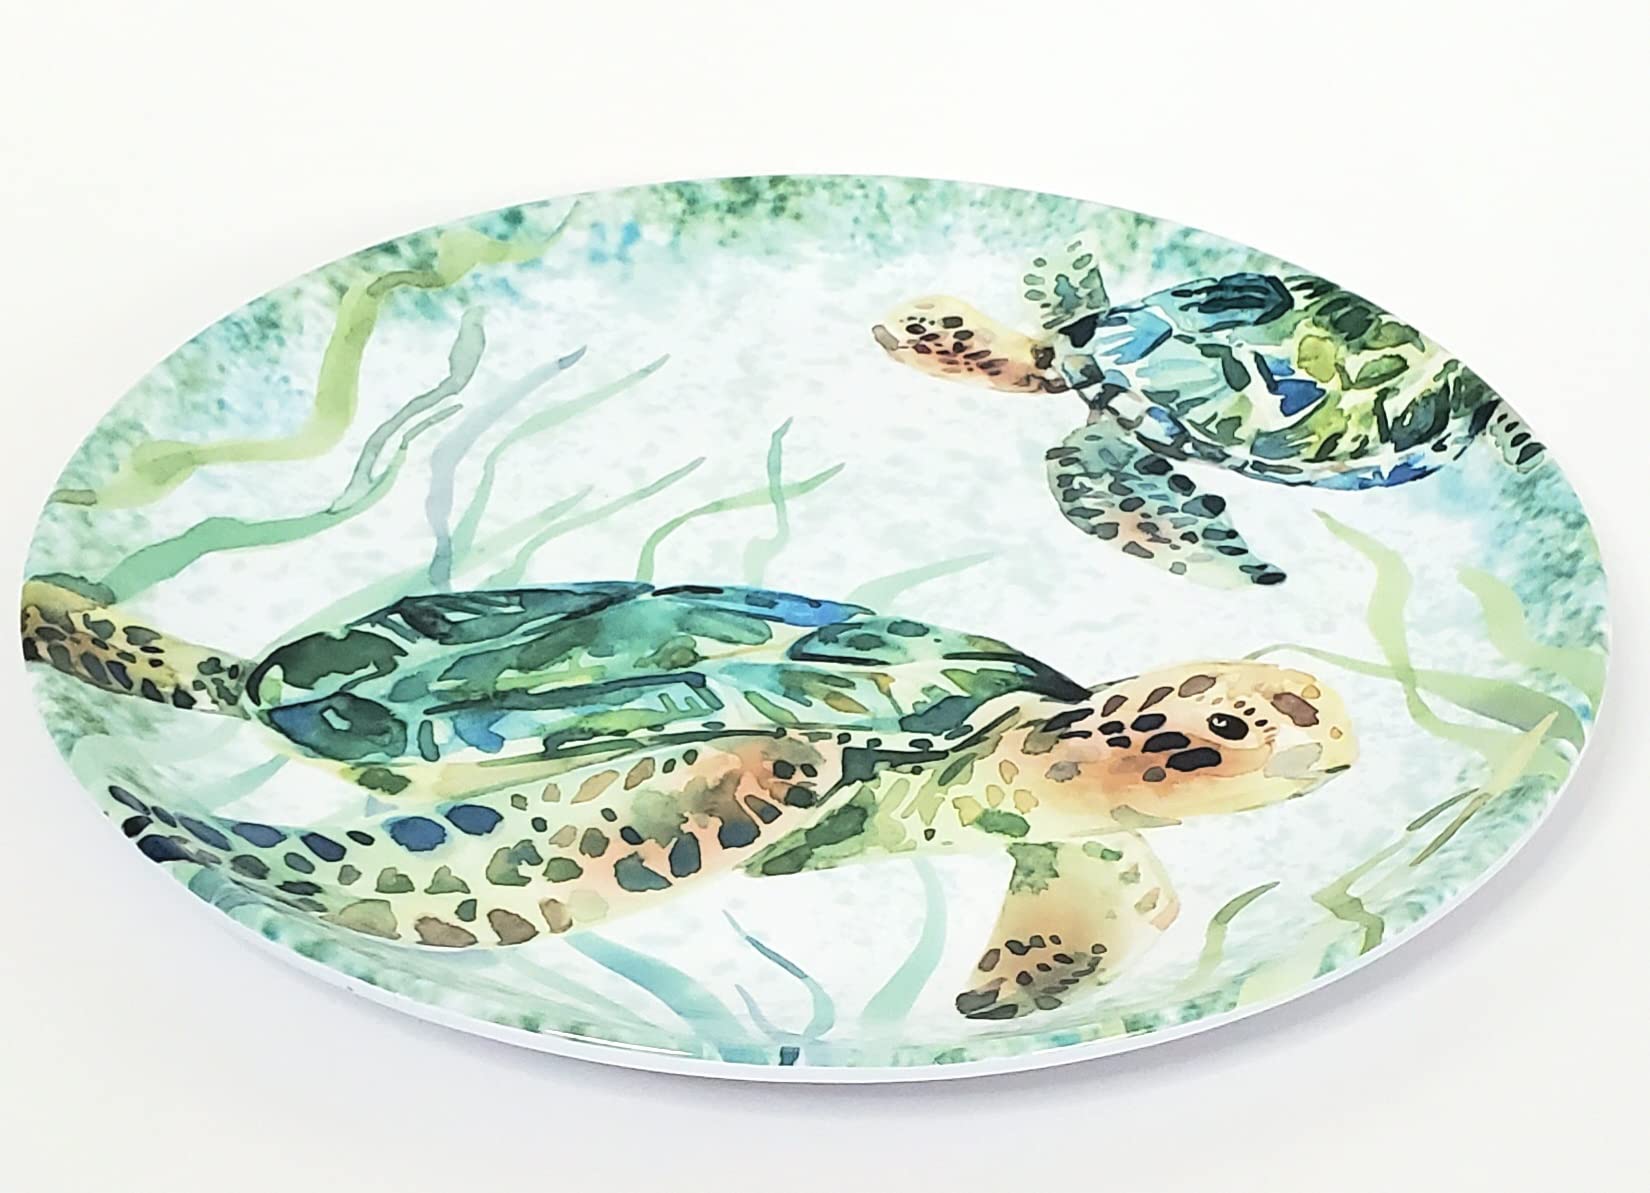 Sigrid Olsen Sea Turtle Melamine Serving Platter 11 inches by 11 inches, Multicolor, 11x11